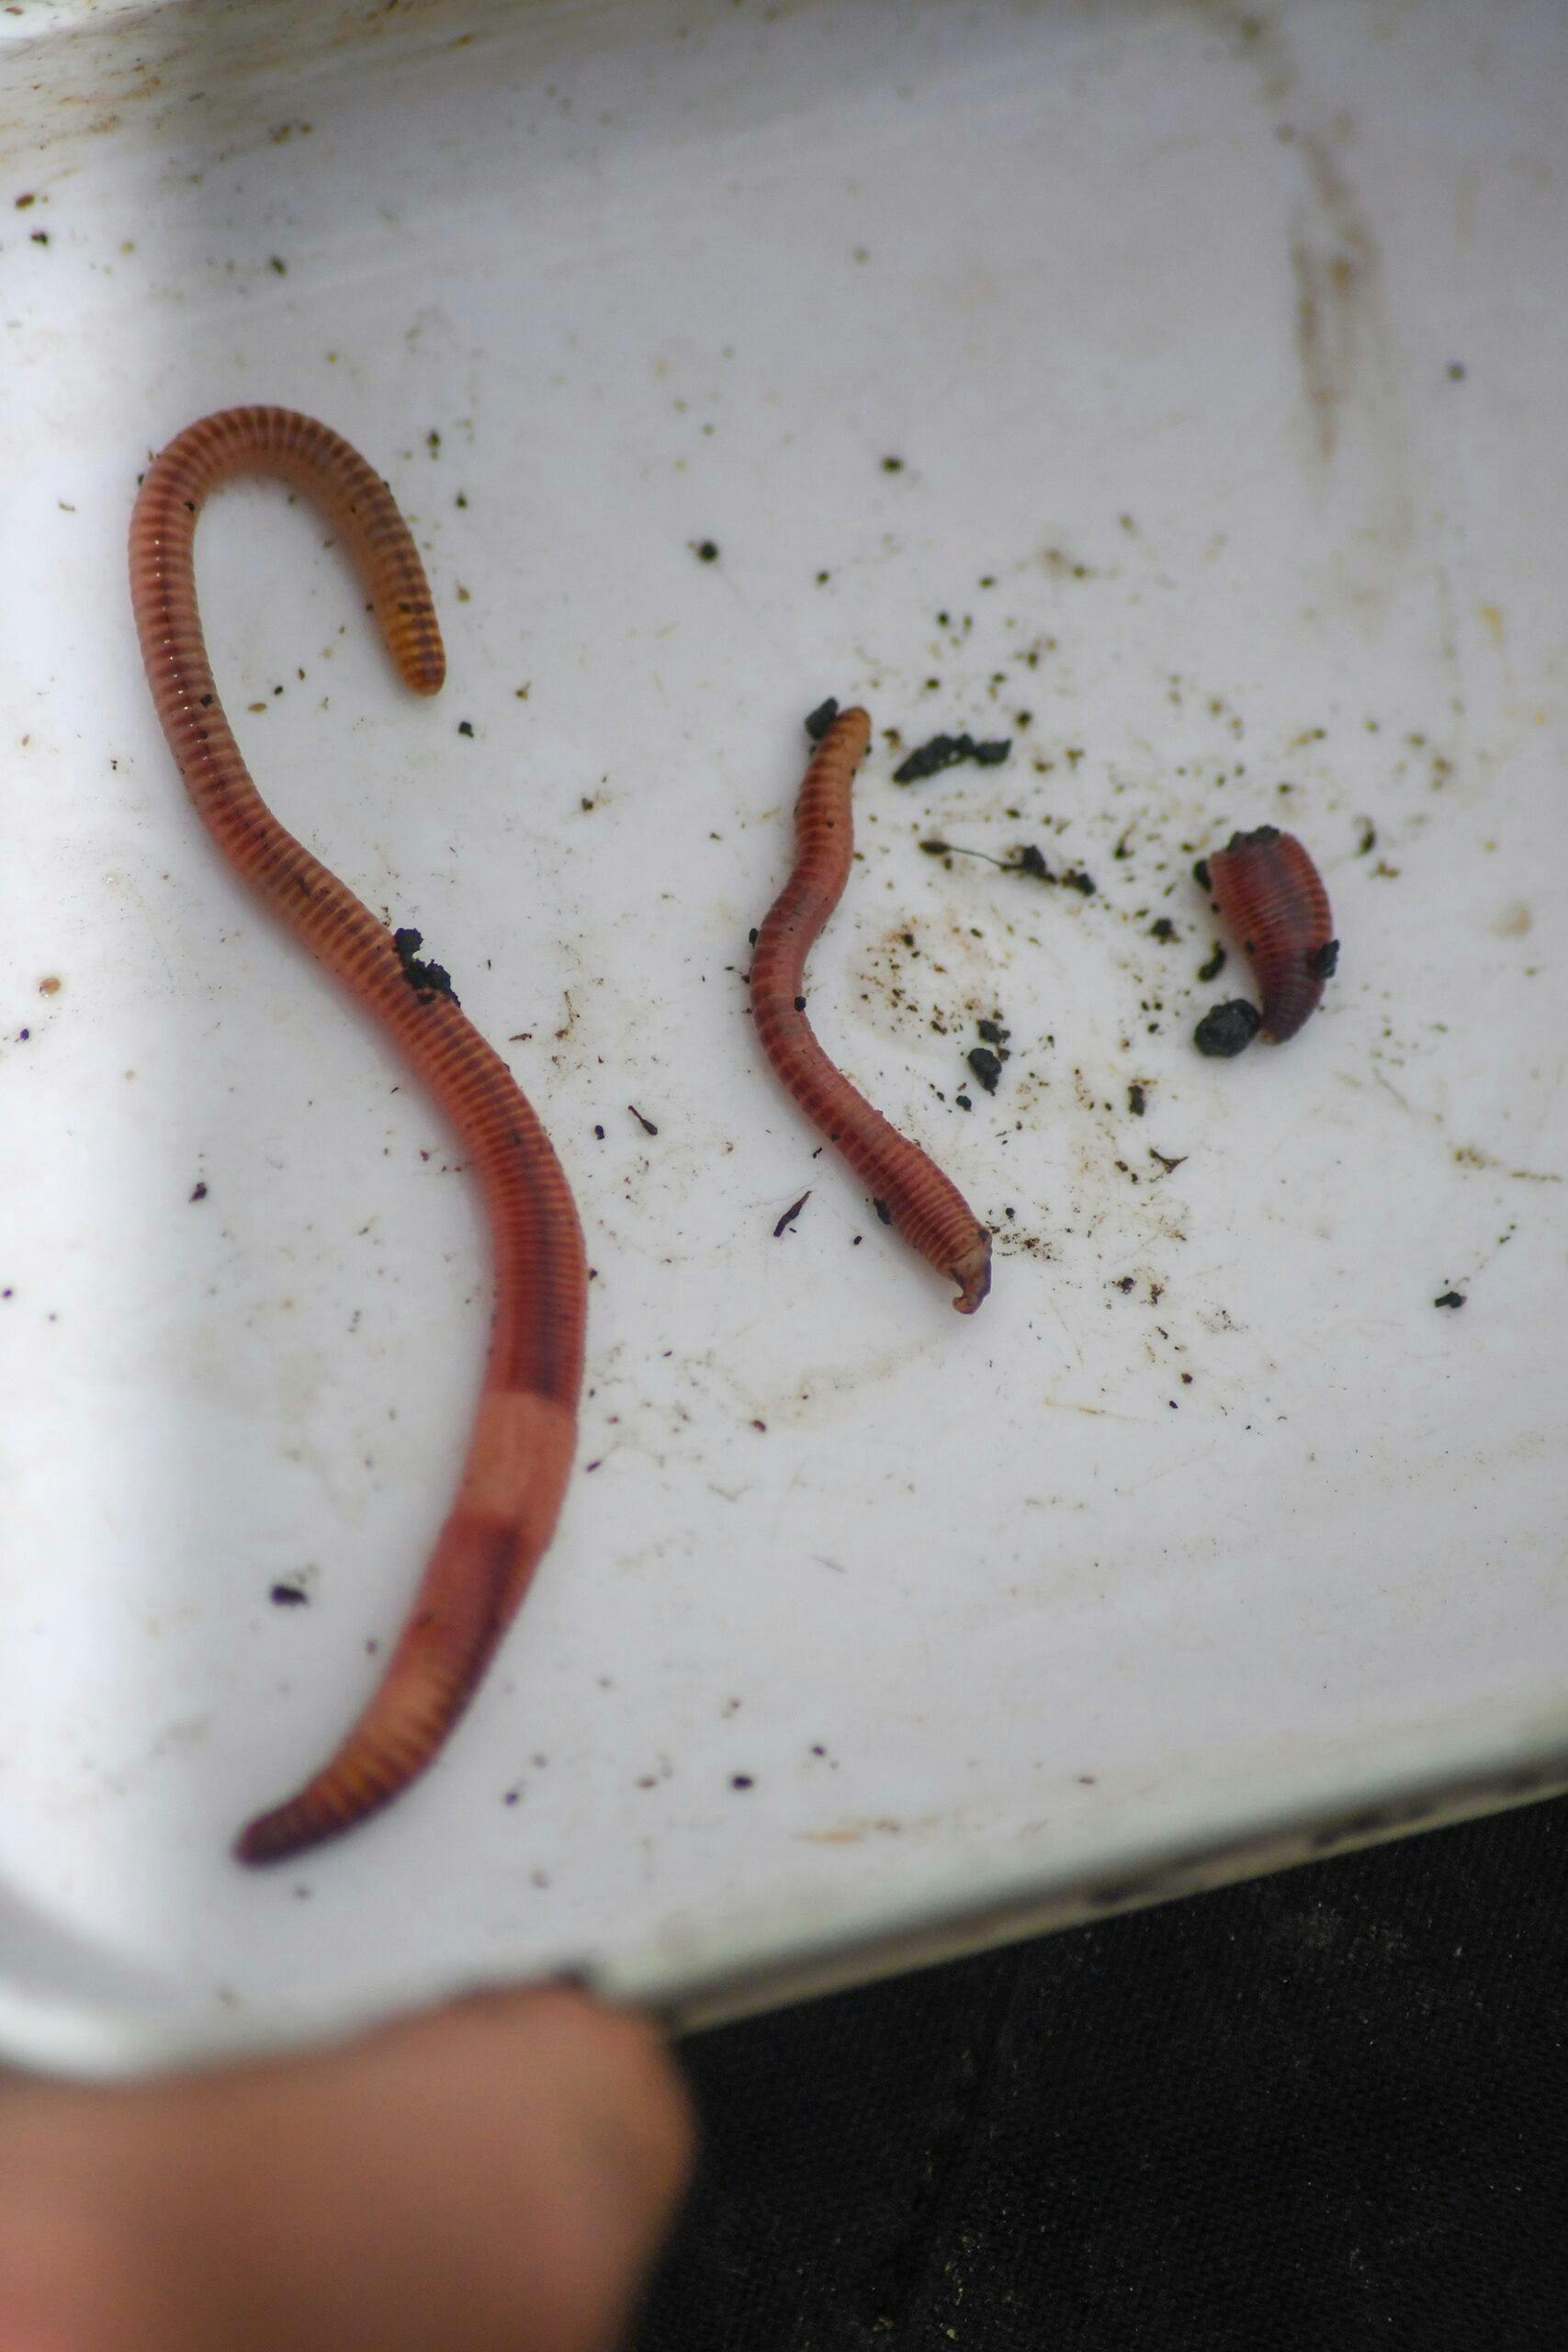 Vary the size of the worm to the size of fish you want to catch.